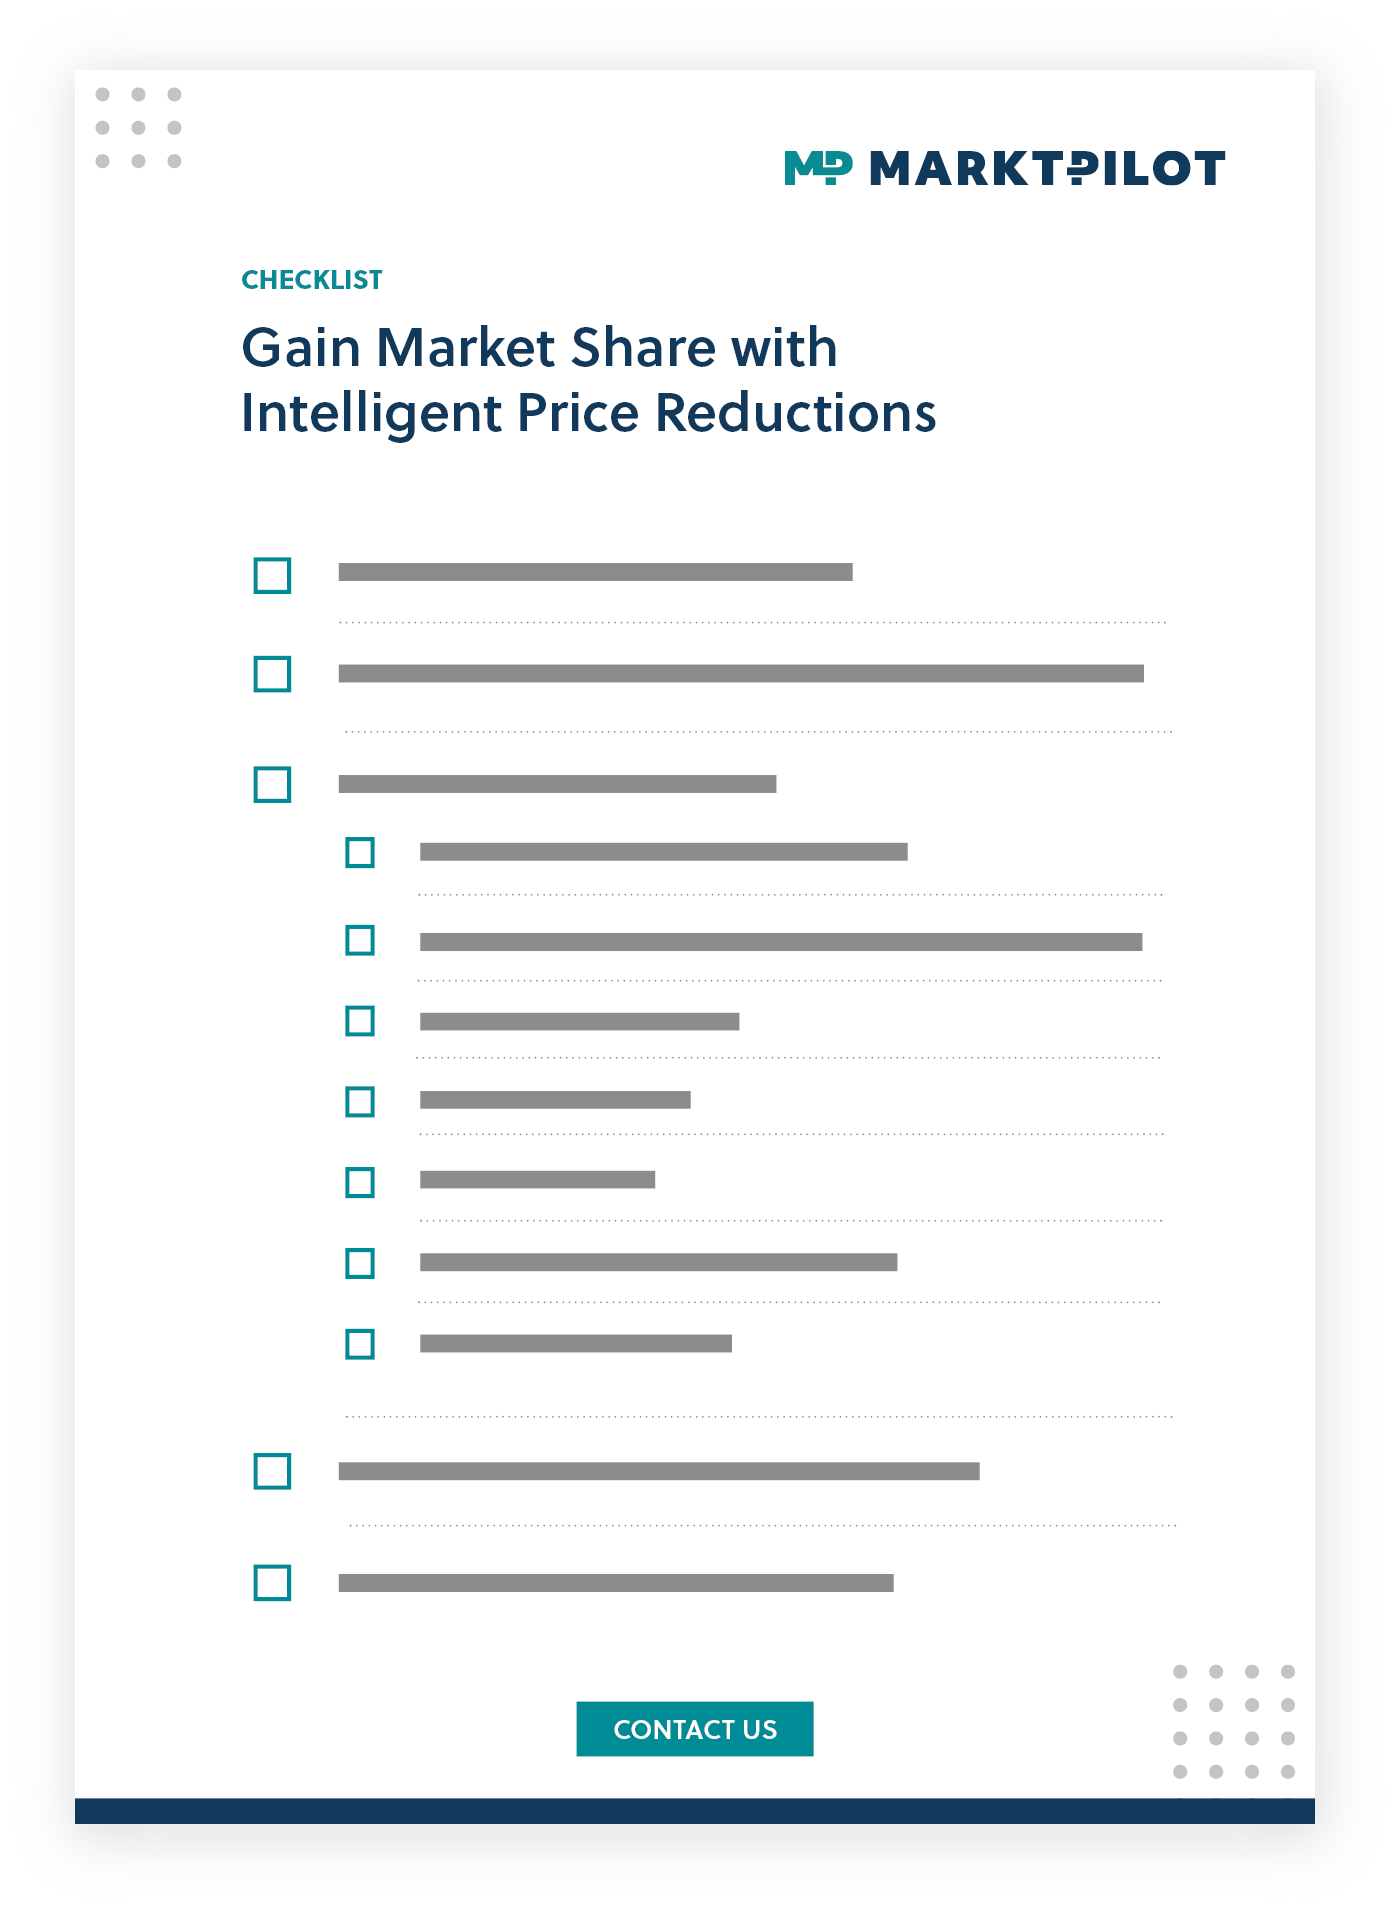 Checklist - Gain Market Share with Intelligent Price Reductions